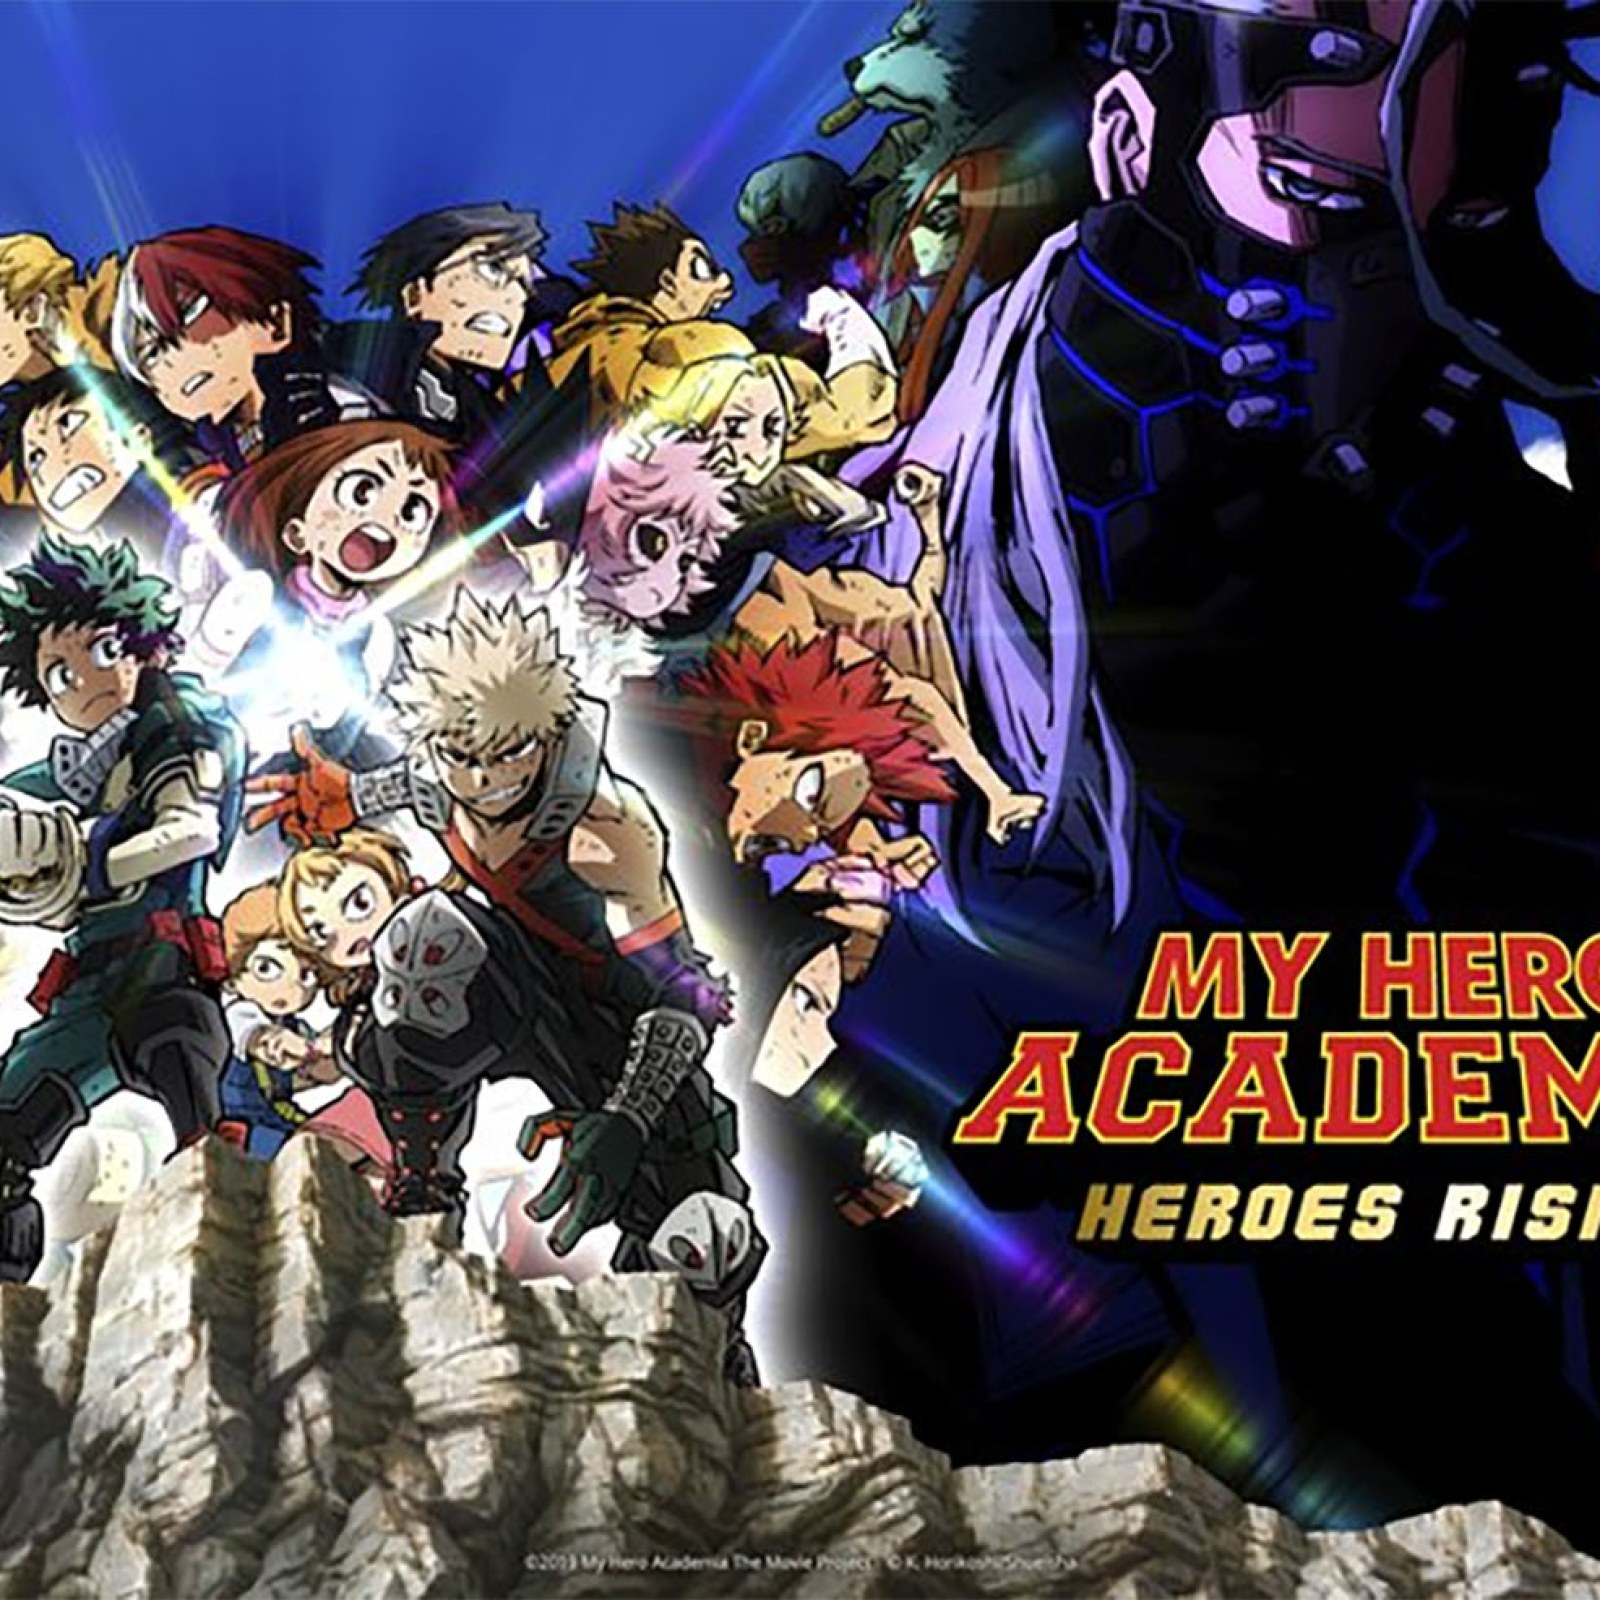 My Hero Academia: World Heroes' Mission' Review: Probably the best